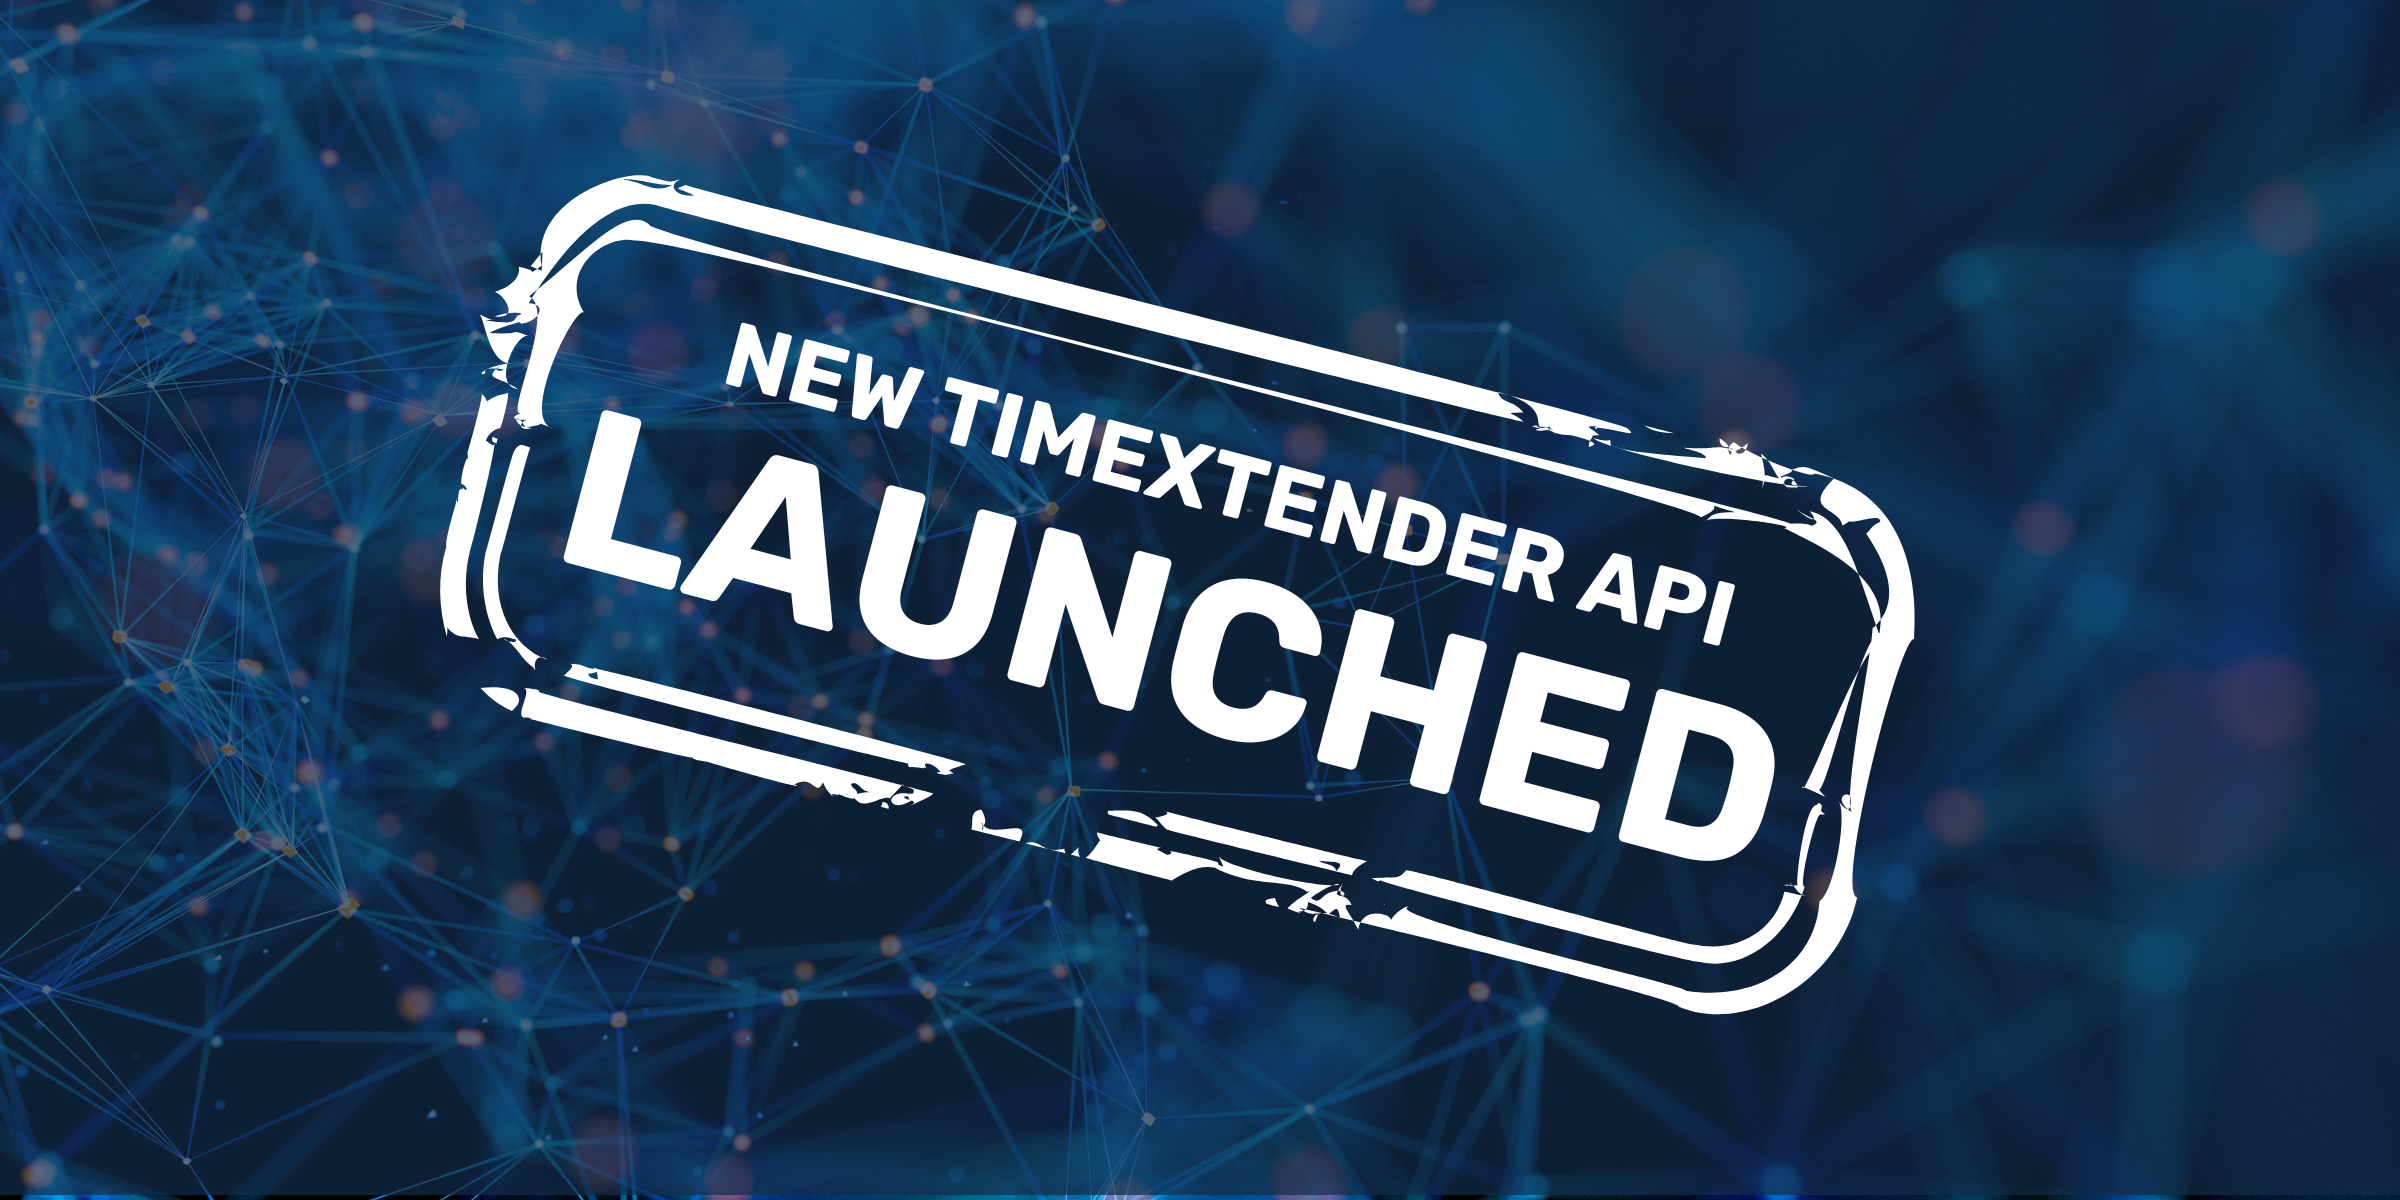 TimeXtender Releases an API for Integration with External Systems